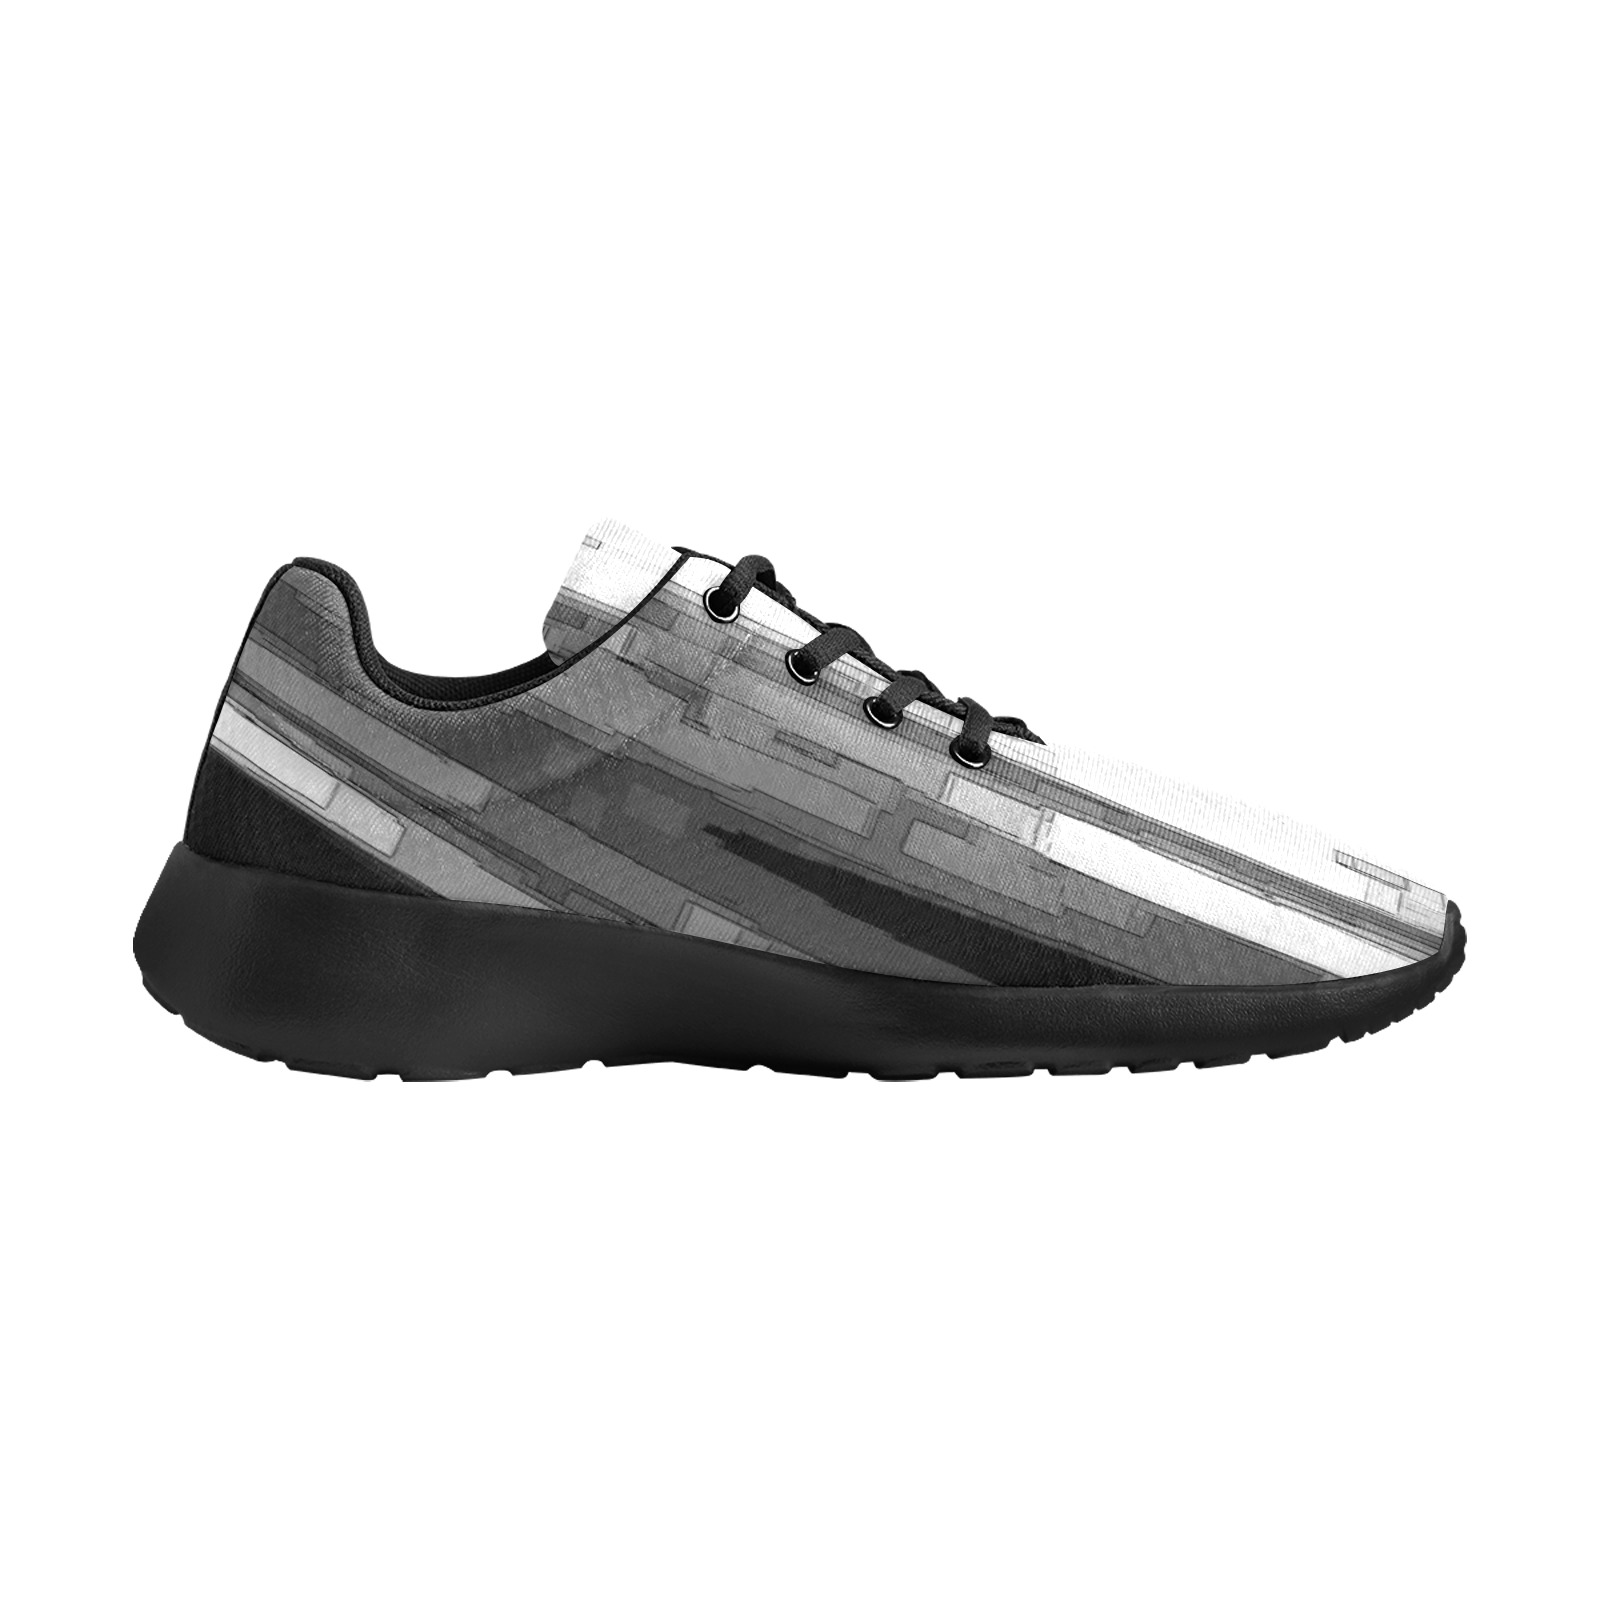 Greyscale Abstract B&W Art Women's Athletic Shoes (Model 0200)